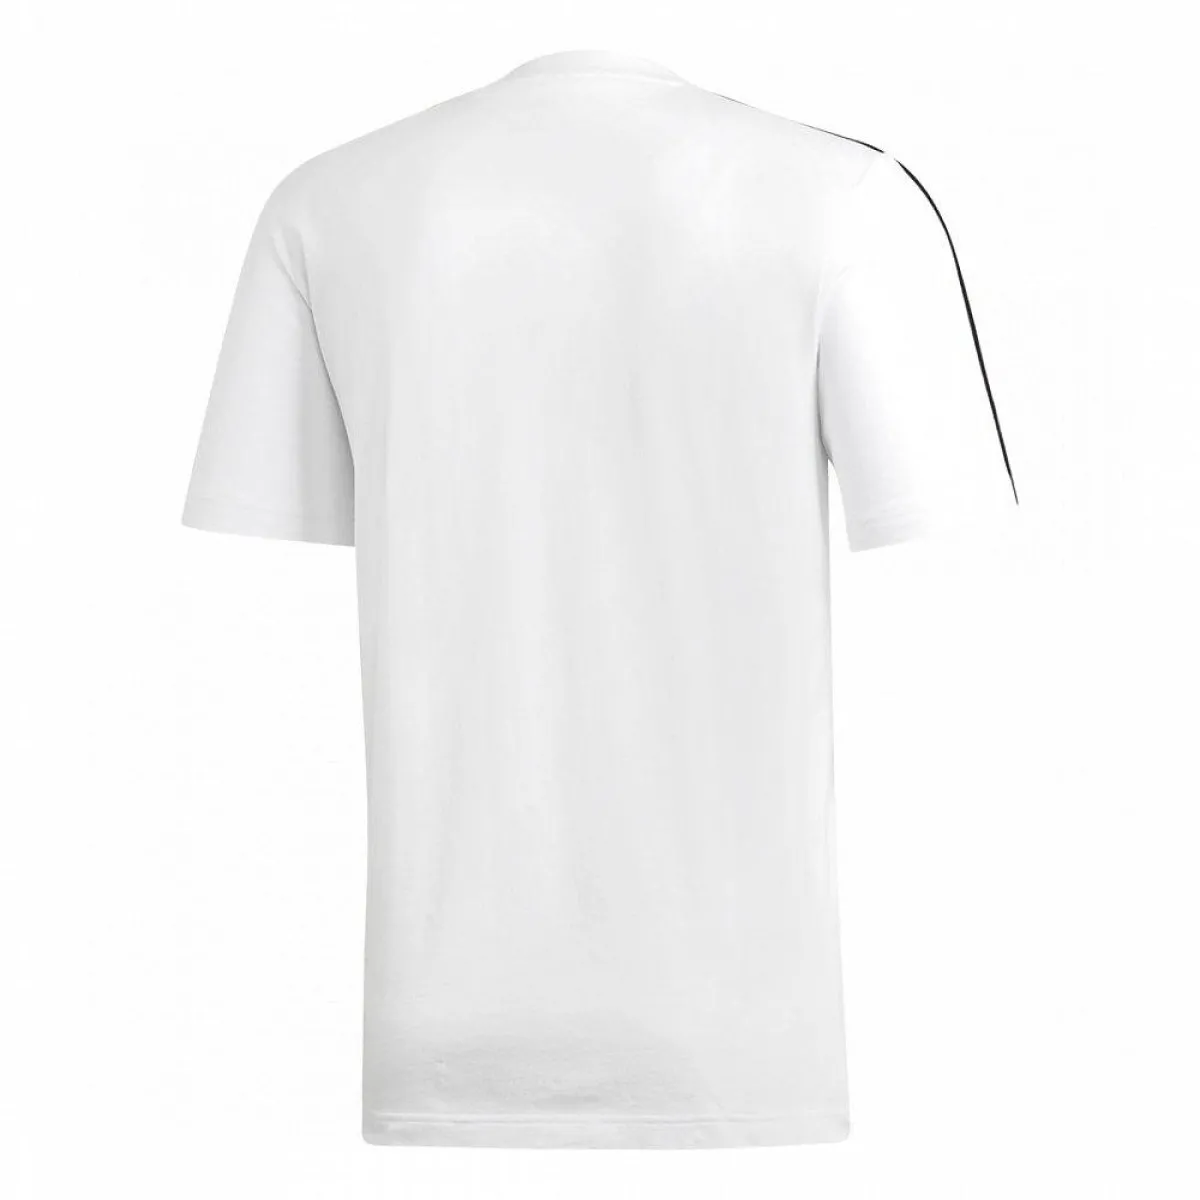 adidas T-shirt white with shoulder stripes